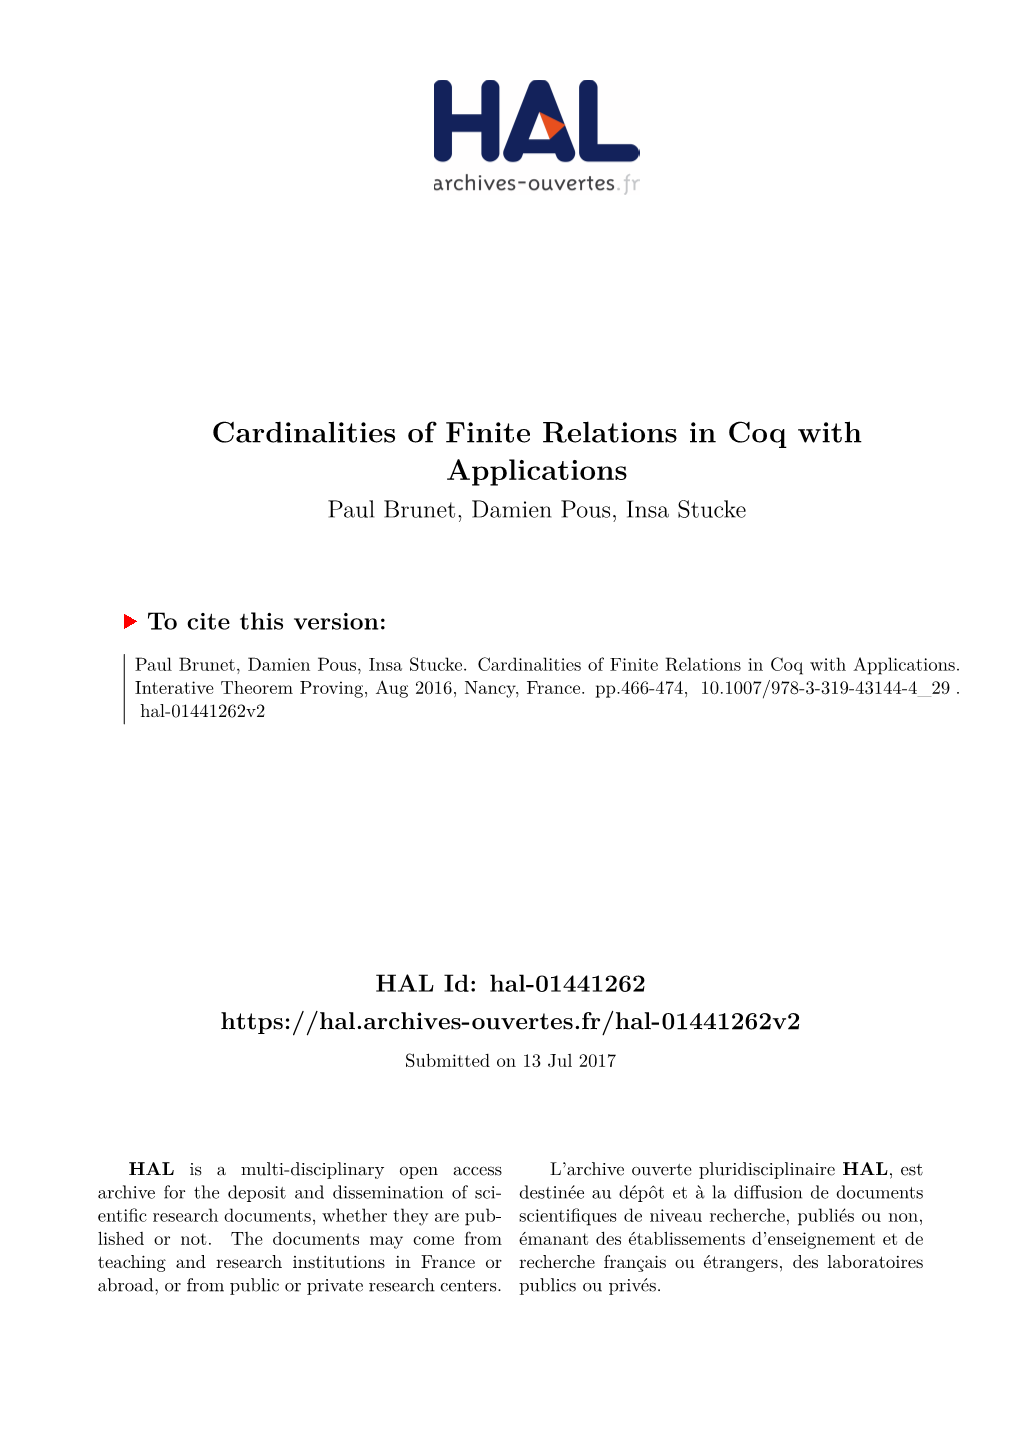 Cardinalities of Finite Relations in Coq with Applications Paul Brunet, Damien Pous, Insa Stucke